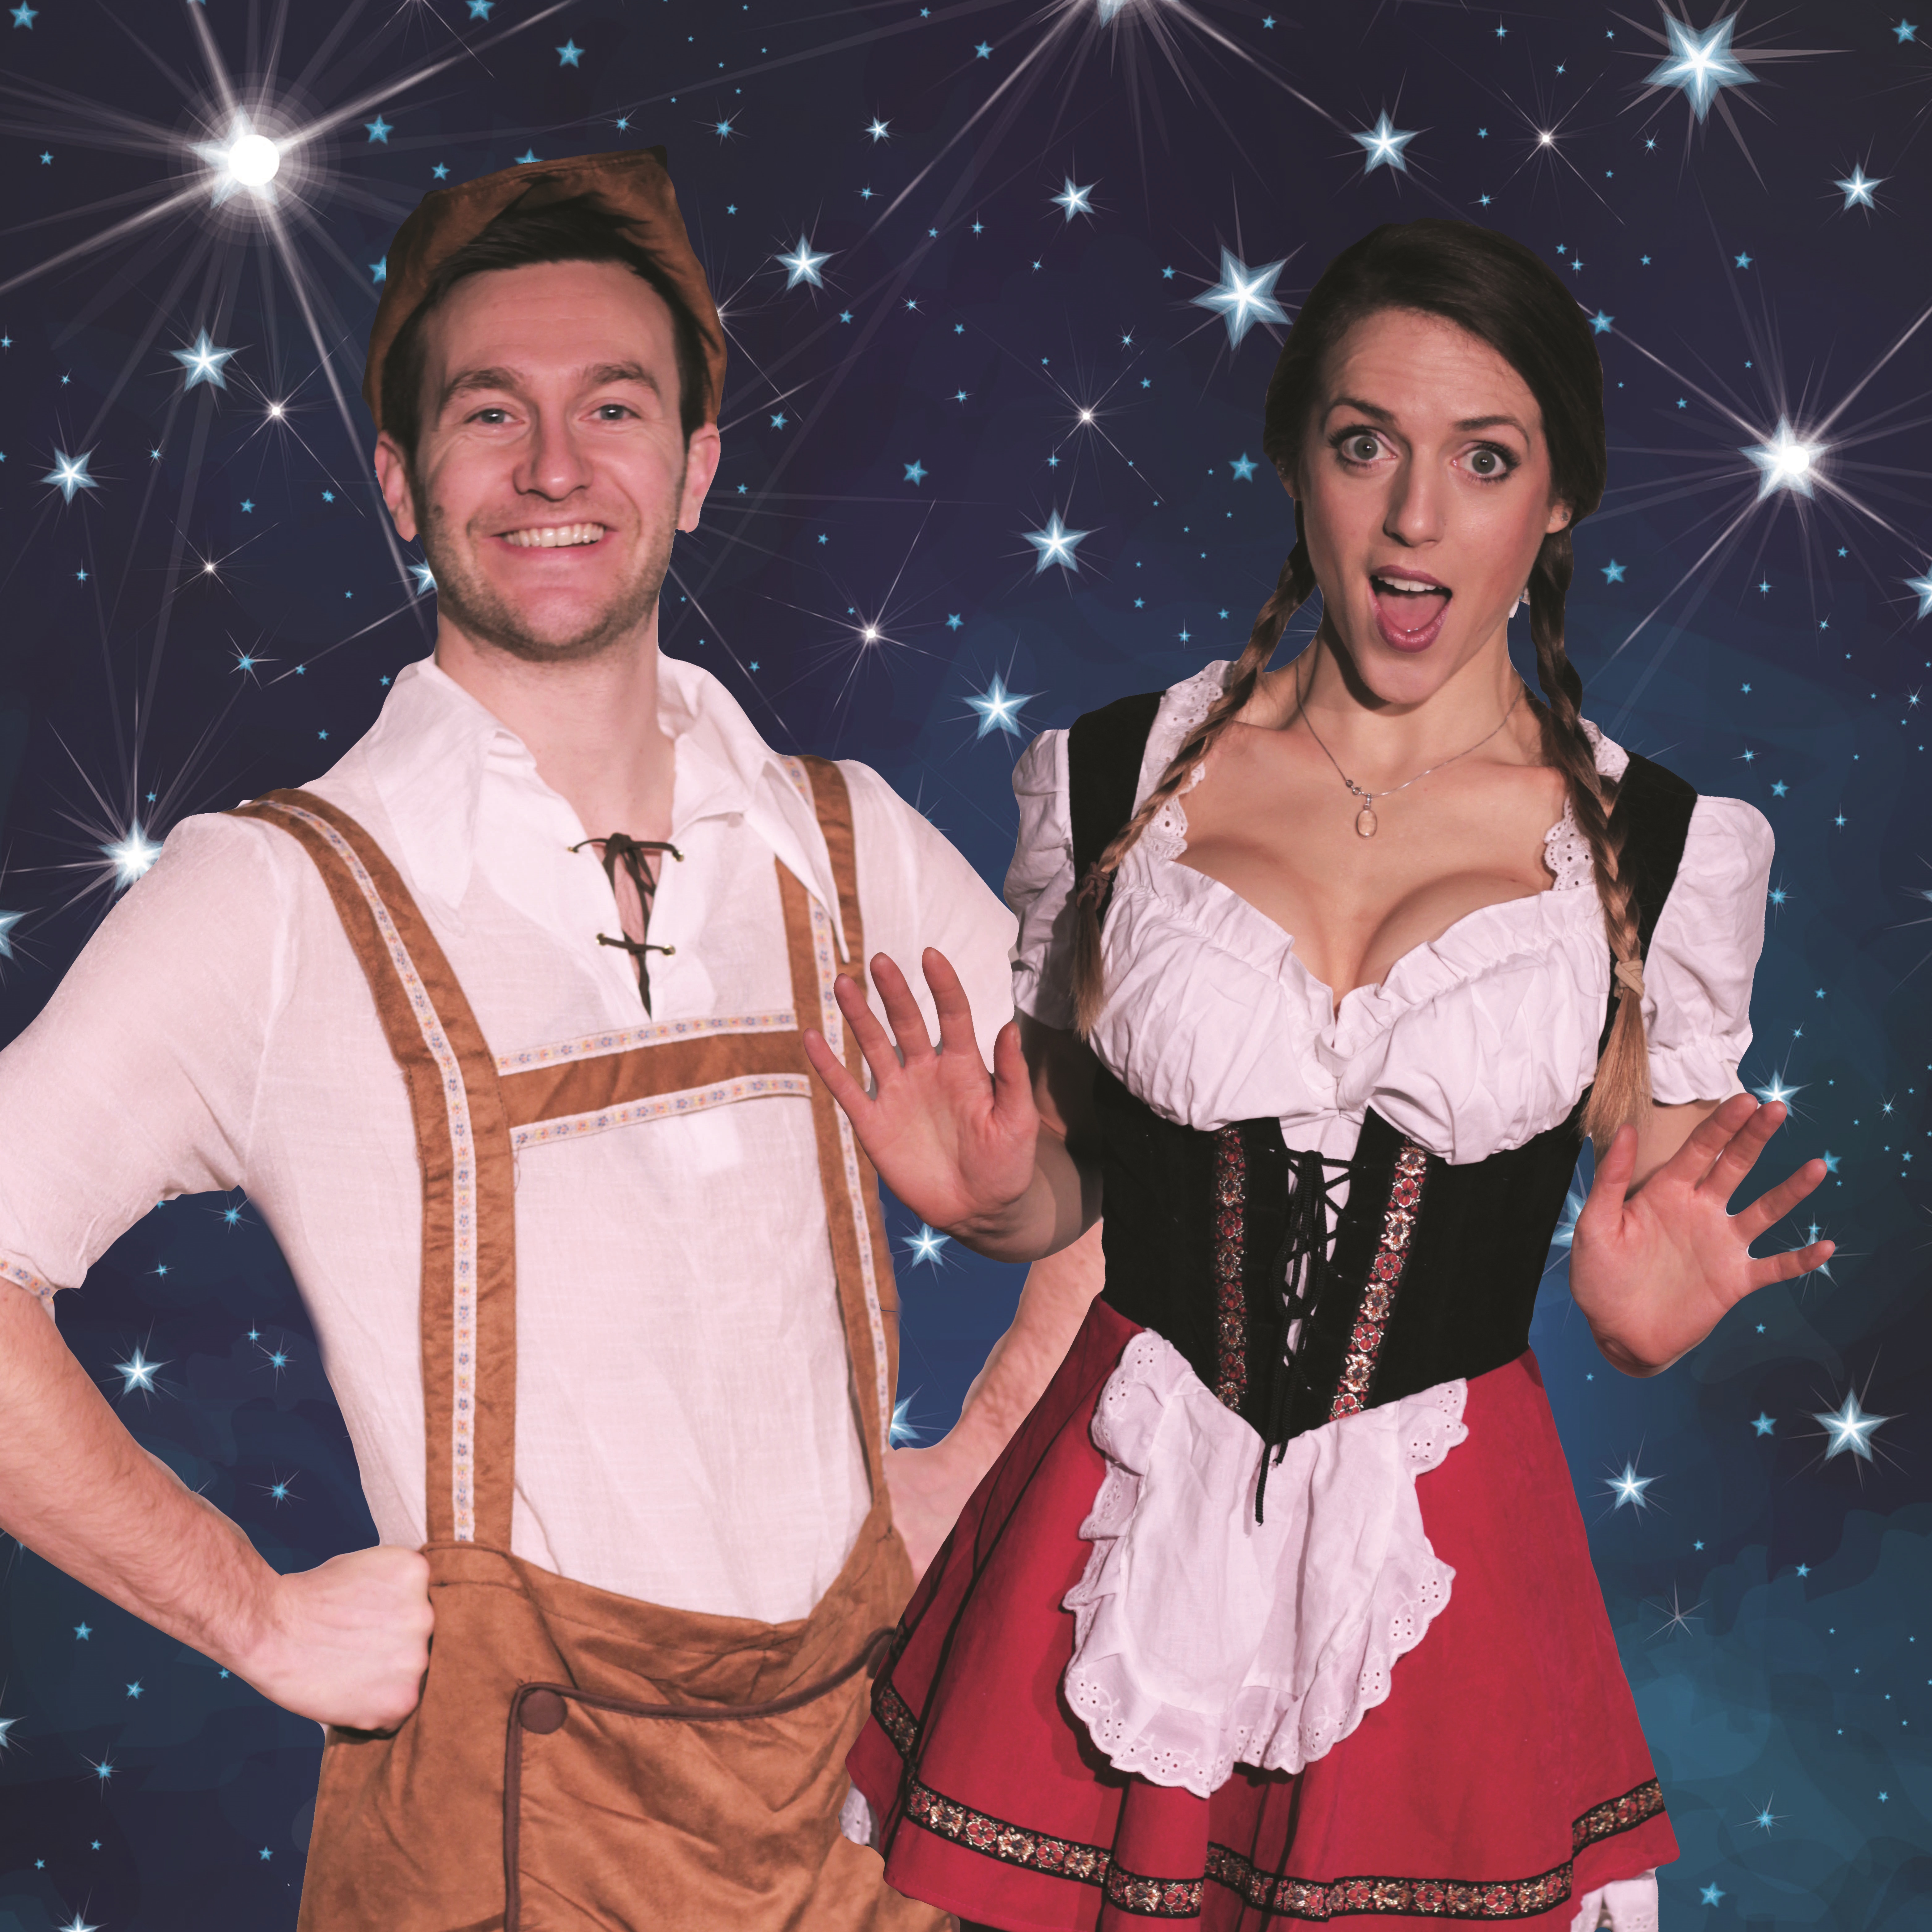 Fancy seeing an adult panto? Hansel and Gretel ‘Go Down’ in the Woods